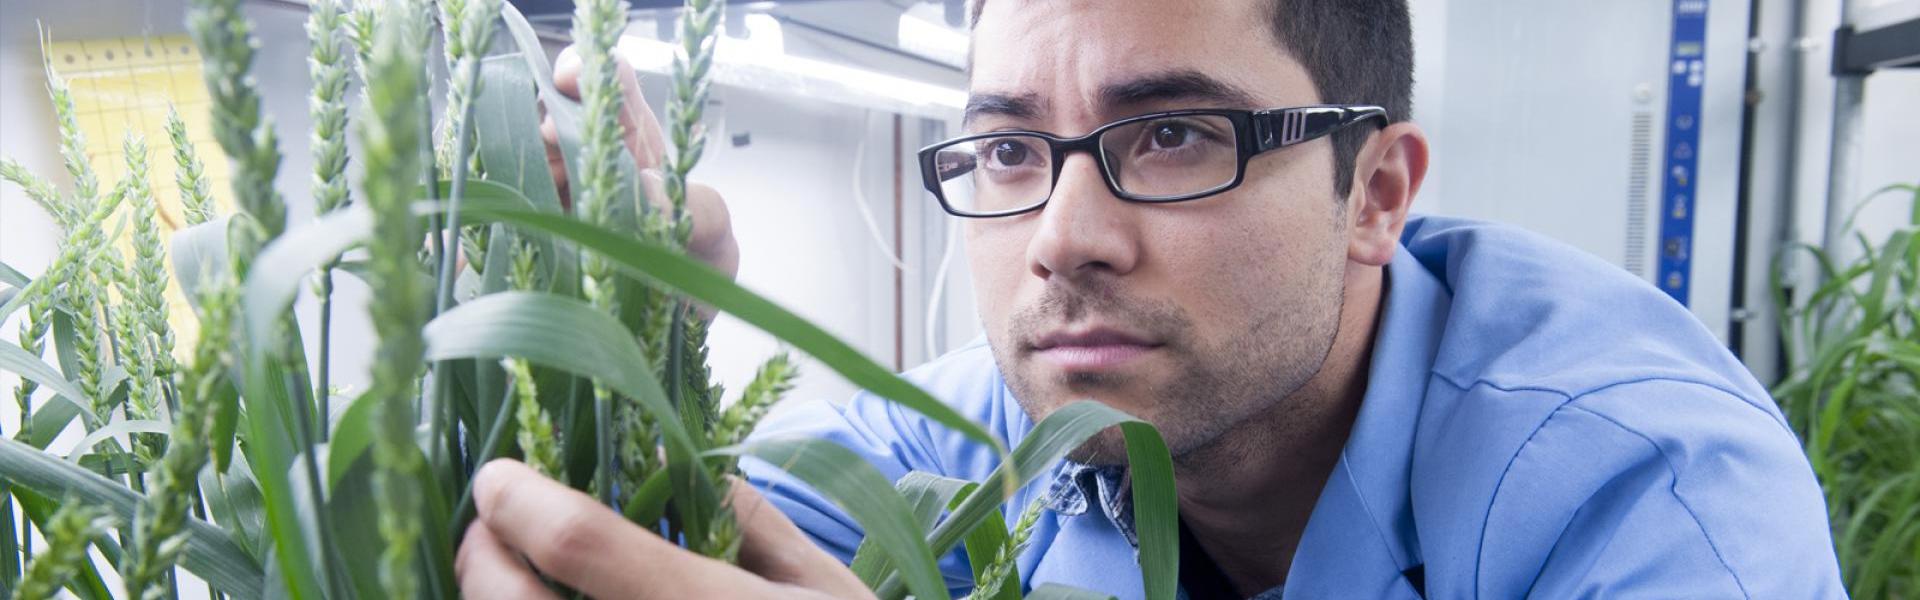 student looking at a plant in a lab